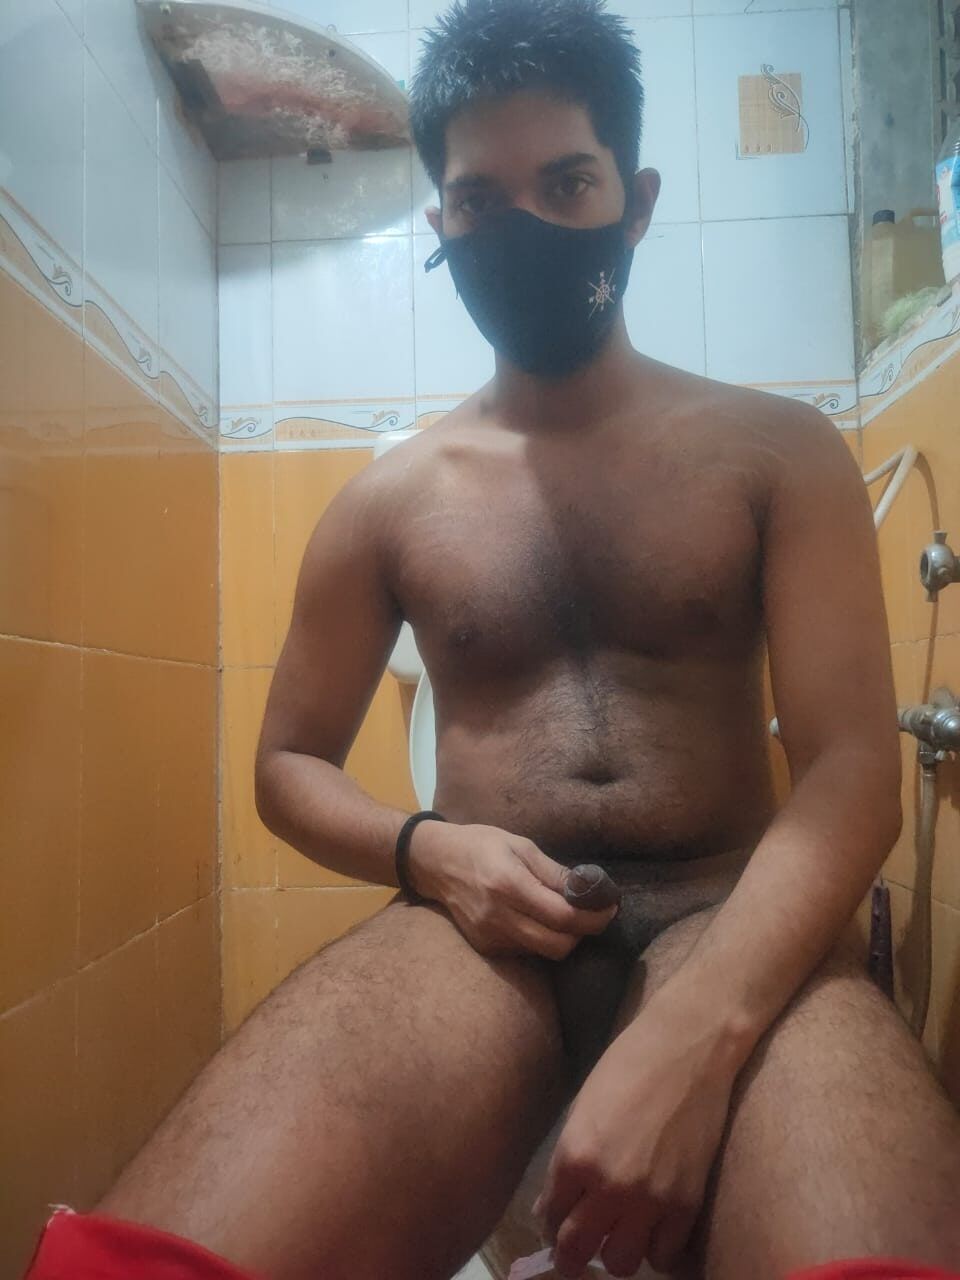 Nude Young Boy In Toilet Showing His Muscles & Penis #7